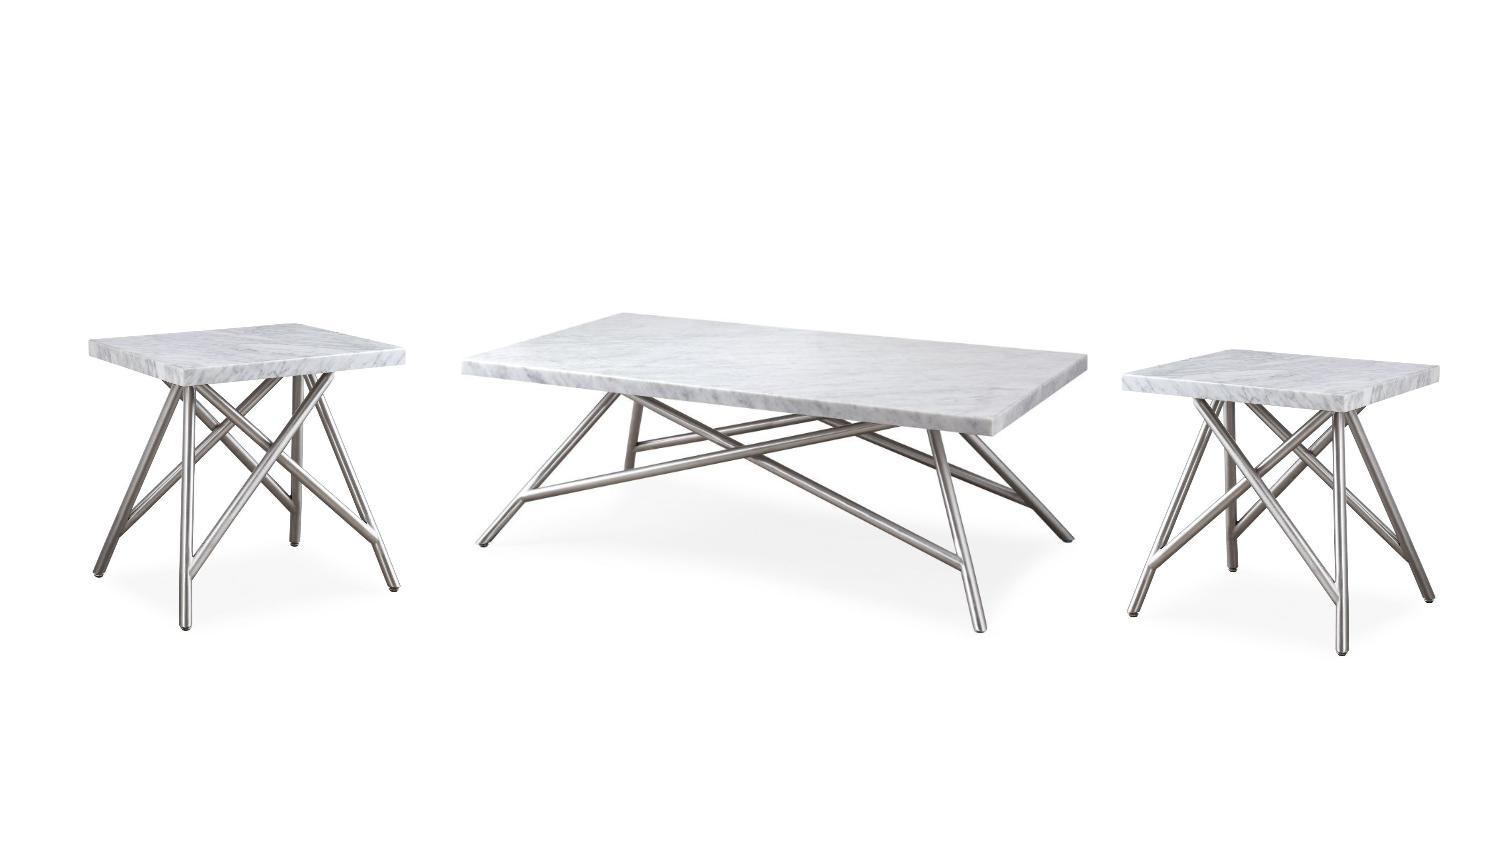 Modern Coffee Table and 2 End Tables Coral 3N2521-3pcs in White, Silver 